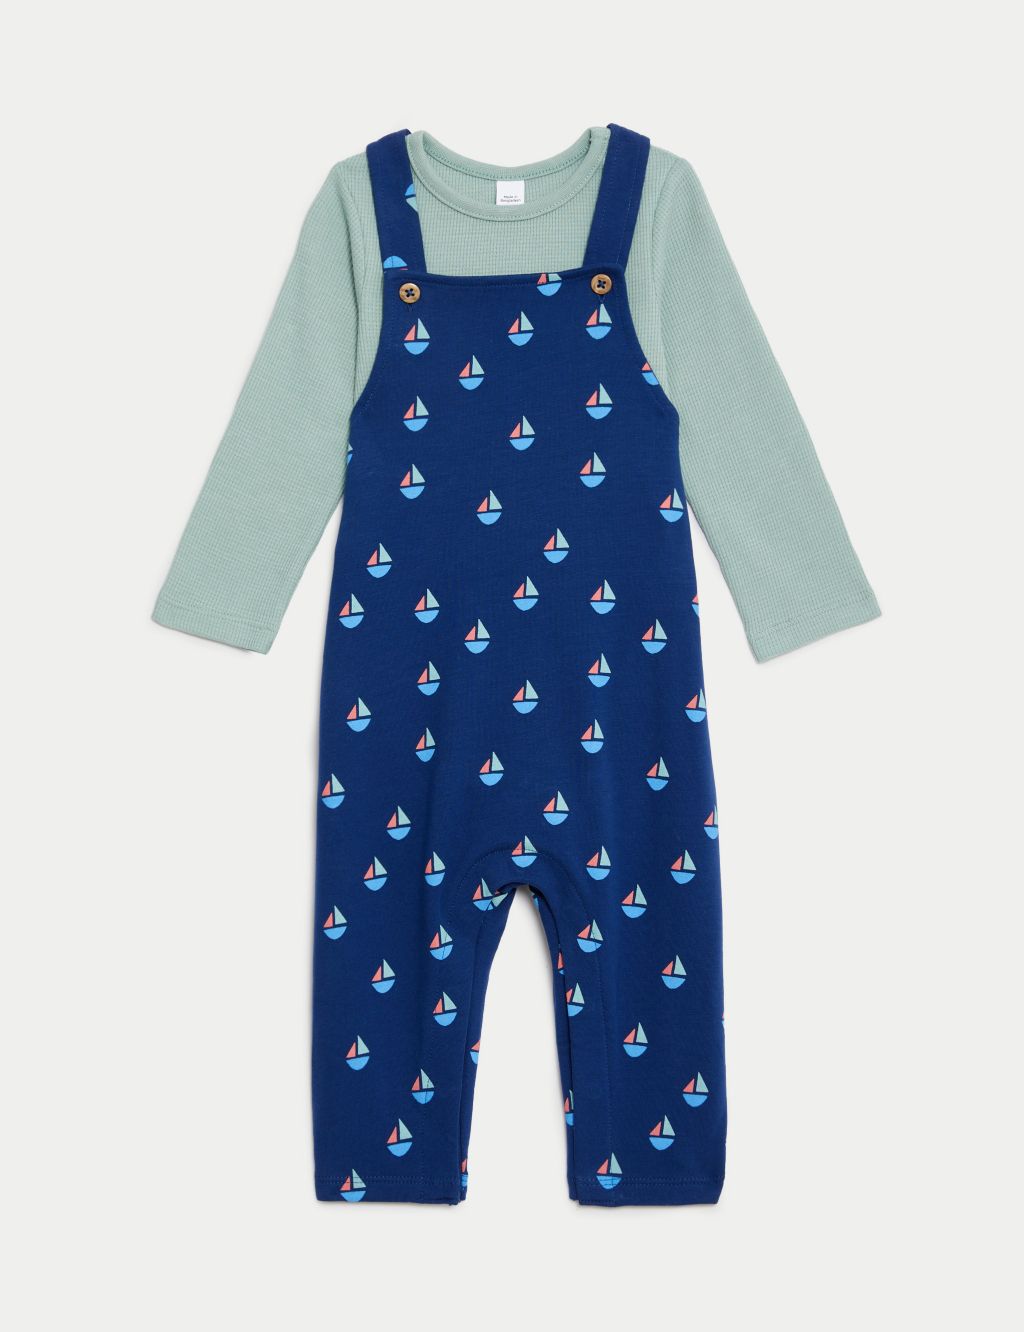 2pc Cotton Rich Boat Print Dungaree Outfit (0-3 Yrs) image 2